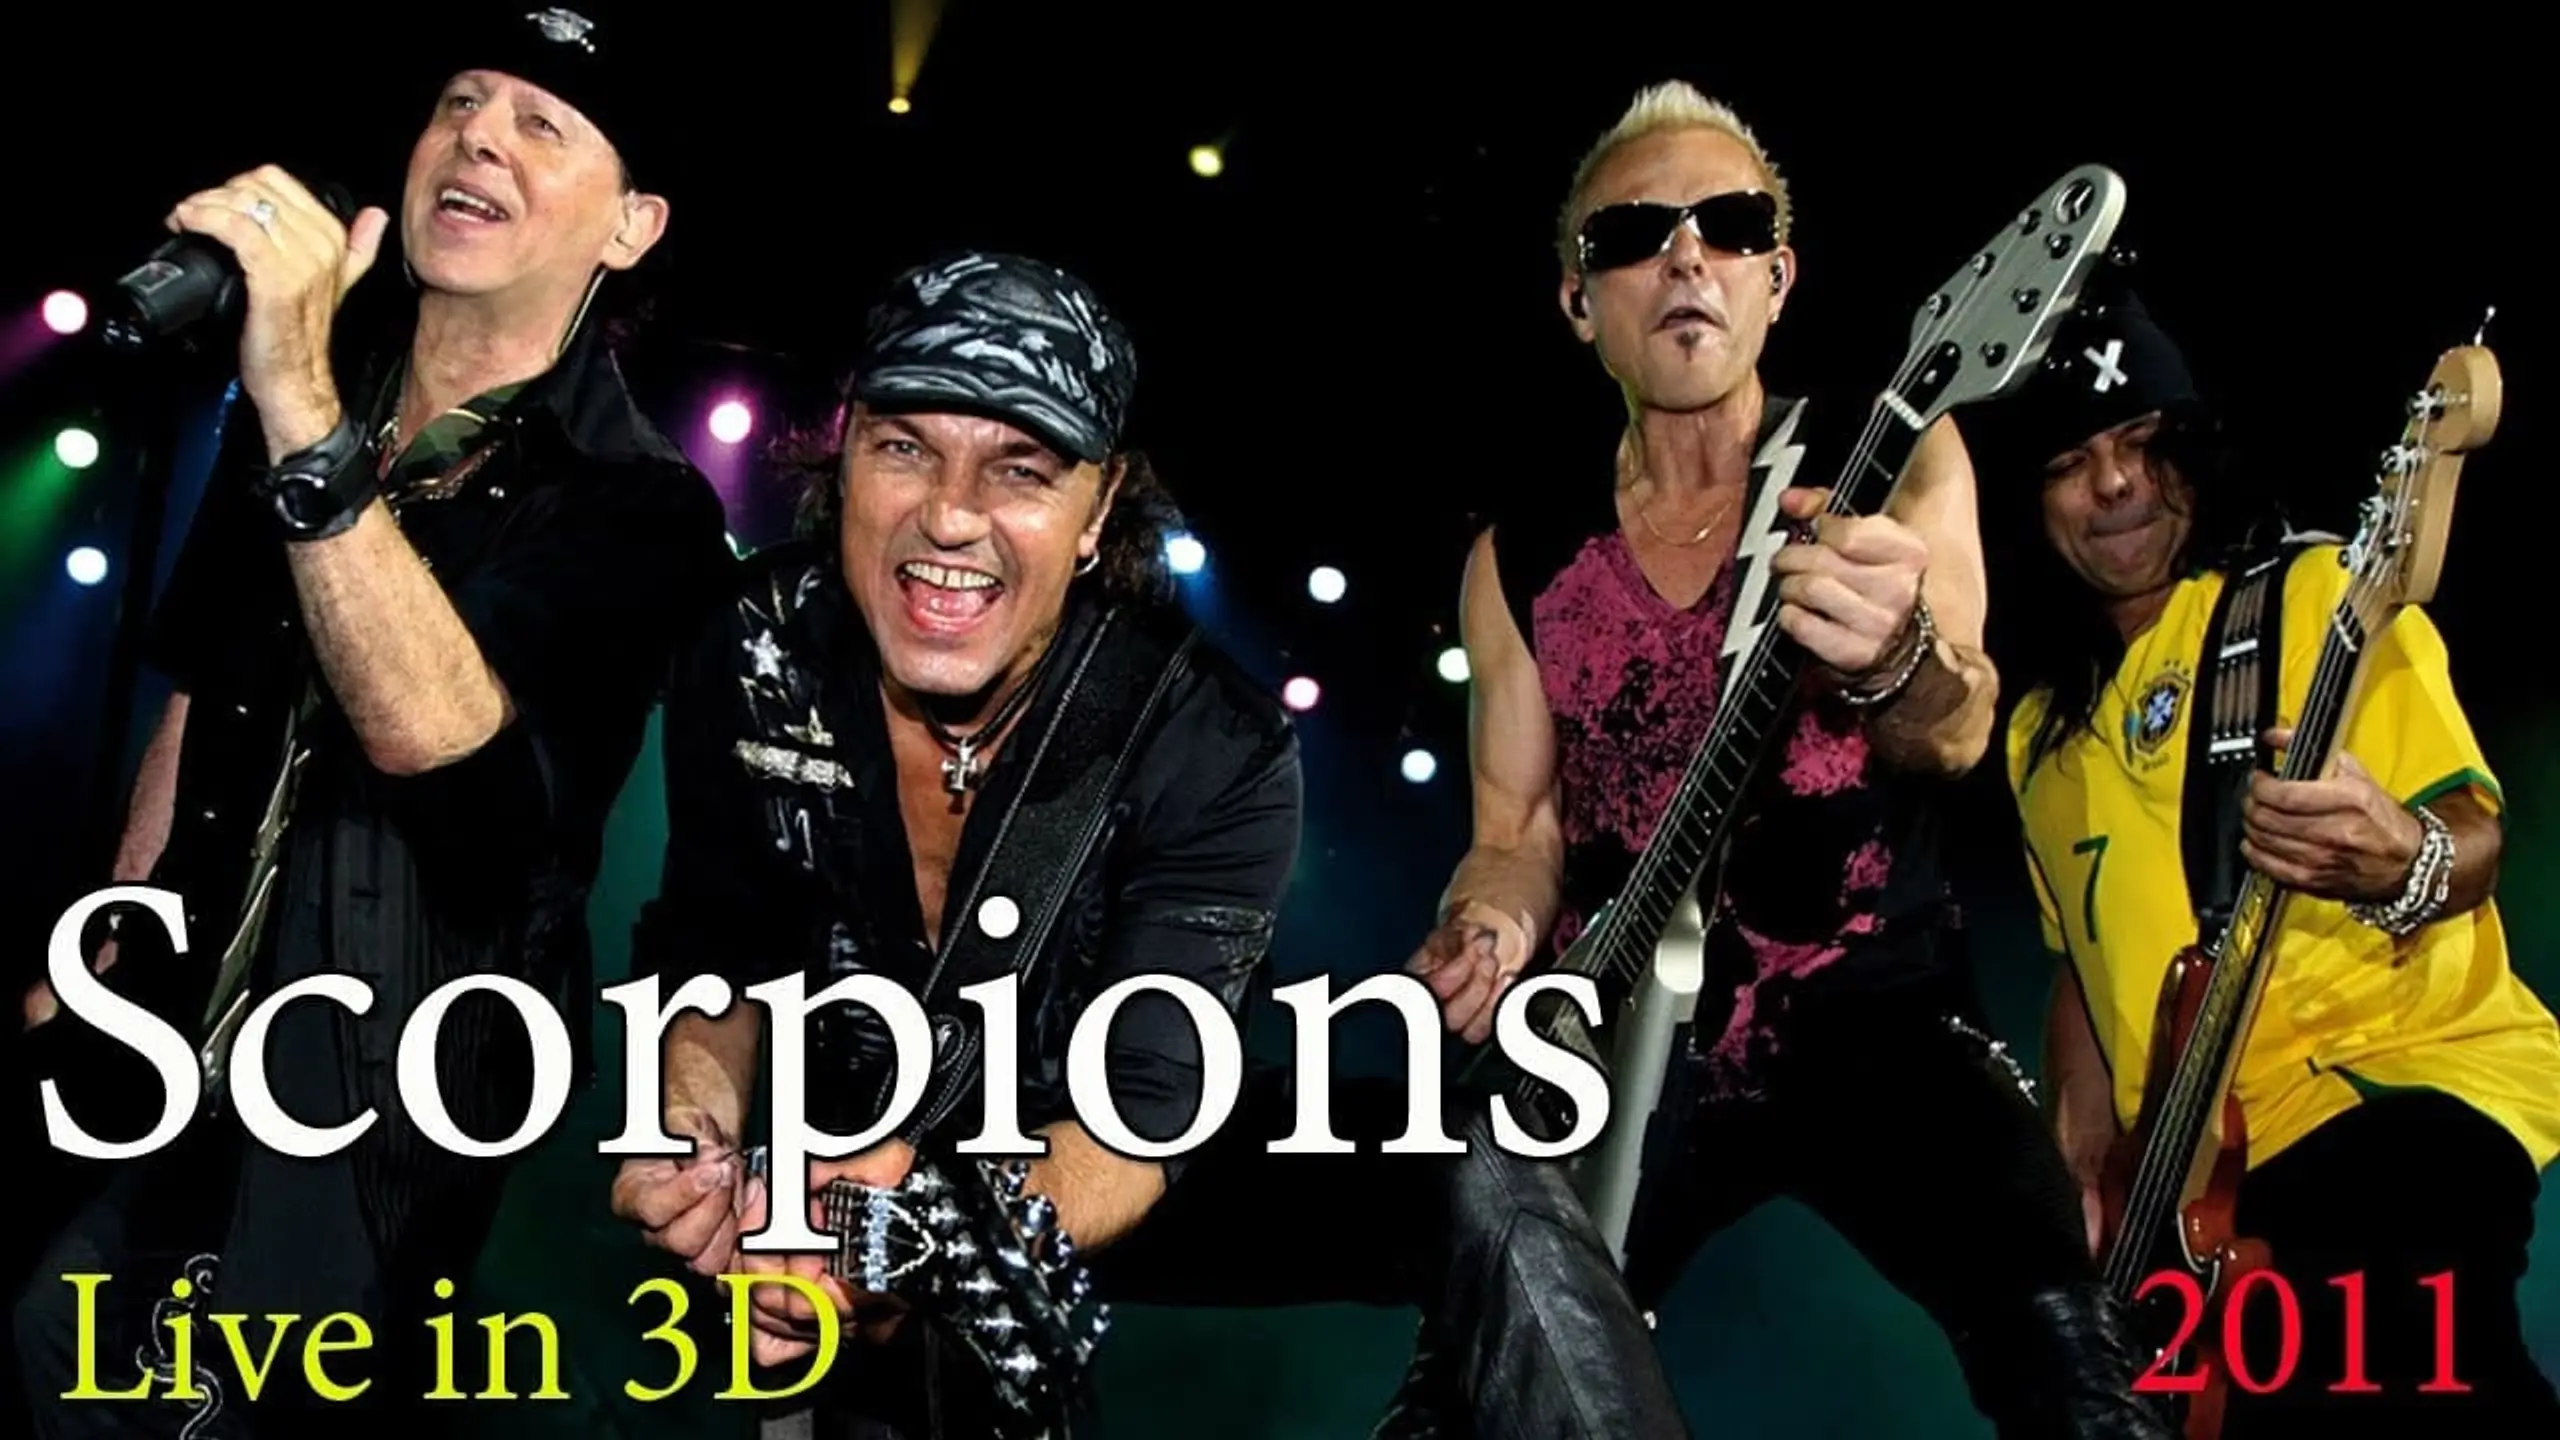 Scorpions - Get Your Sting & Blackout Live